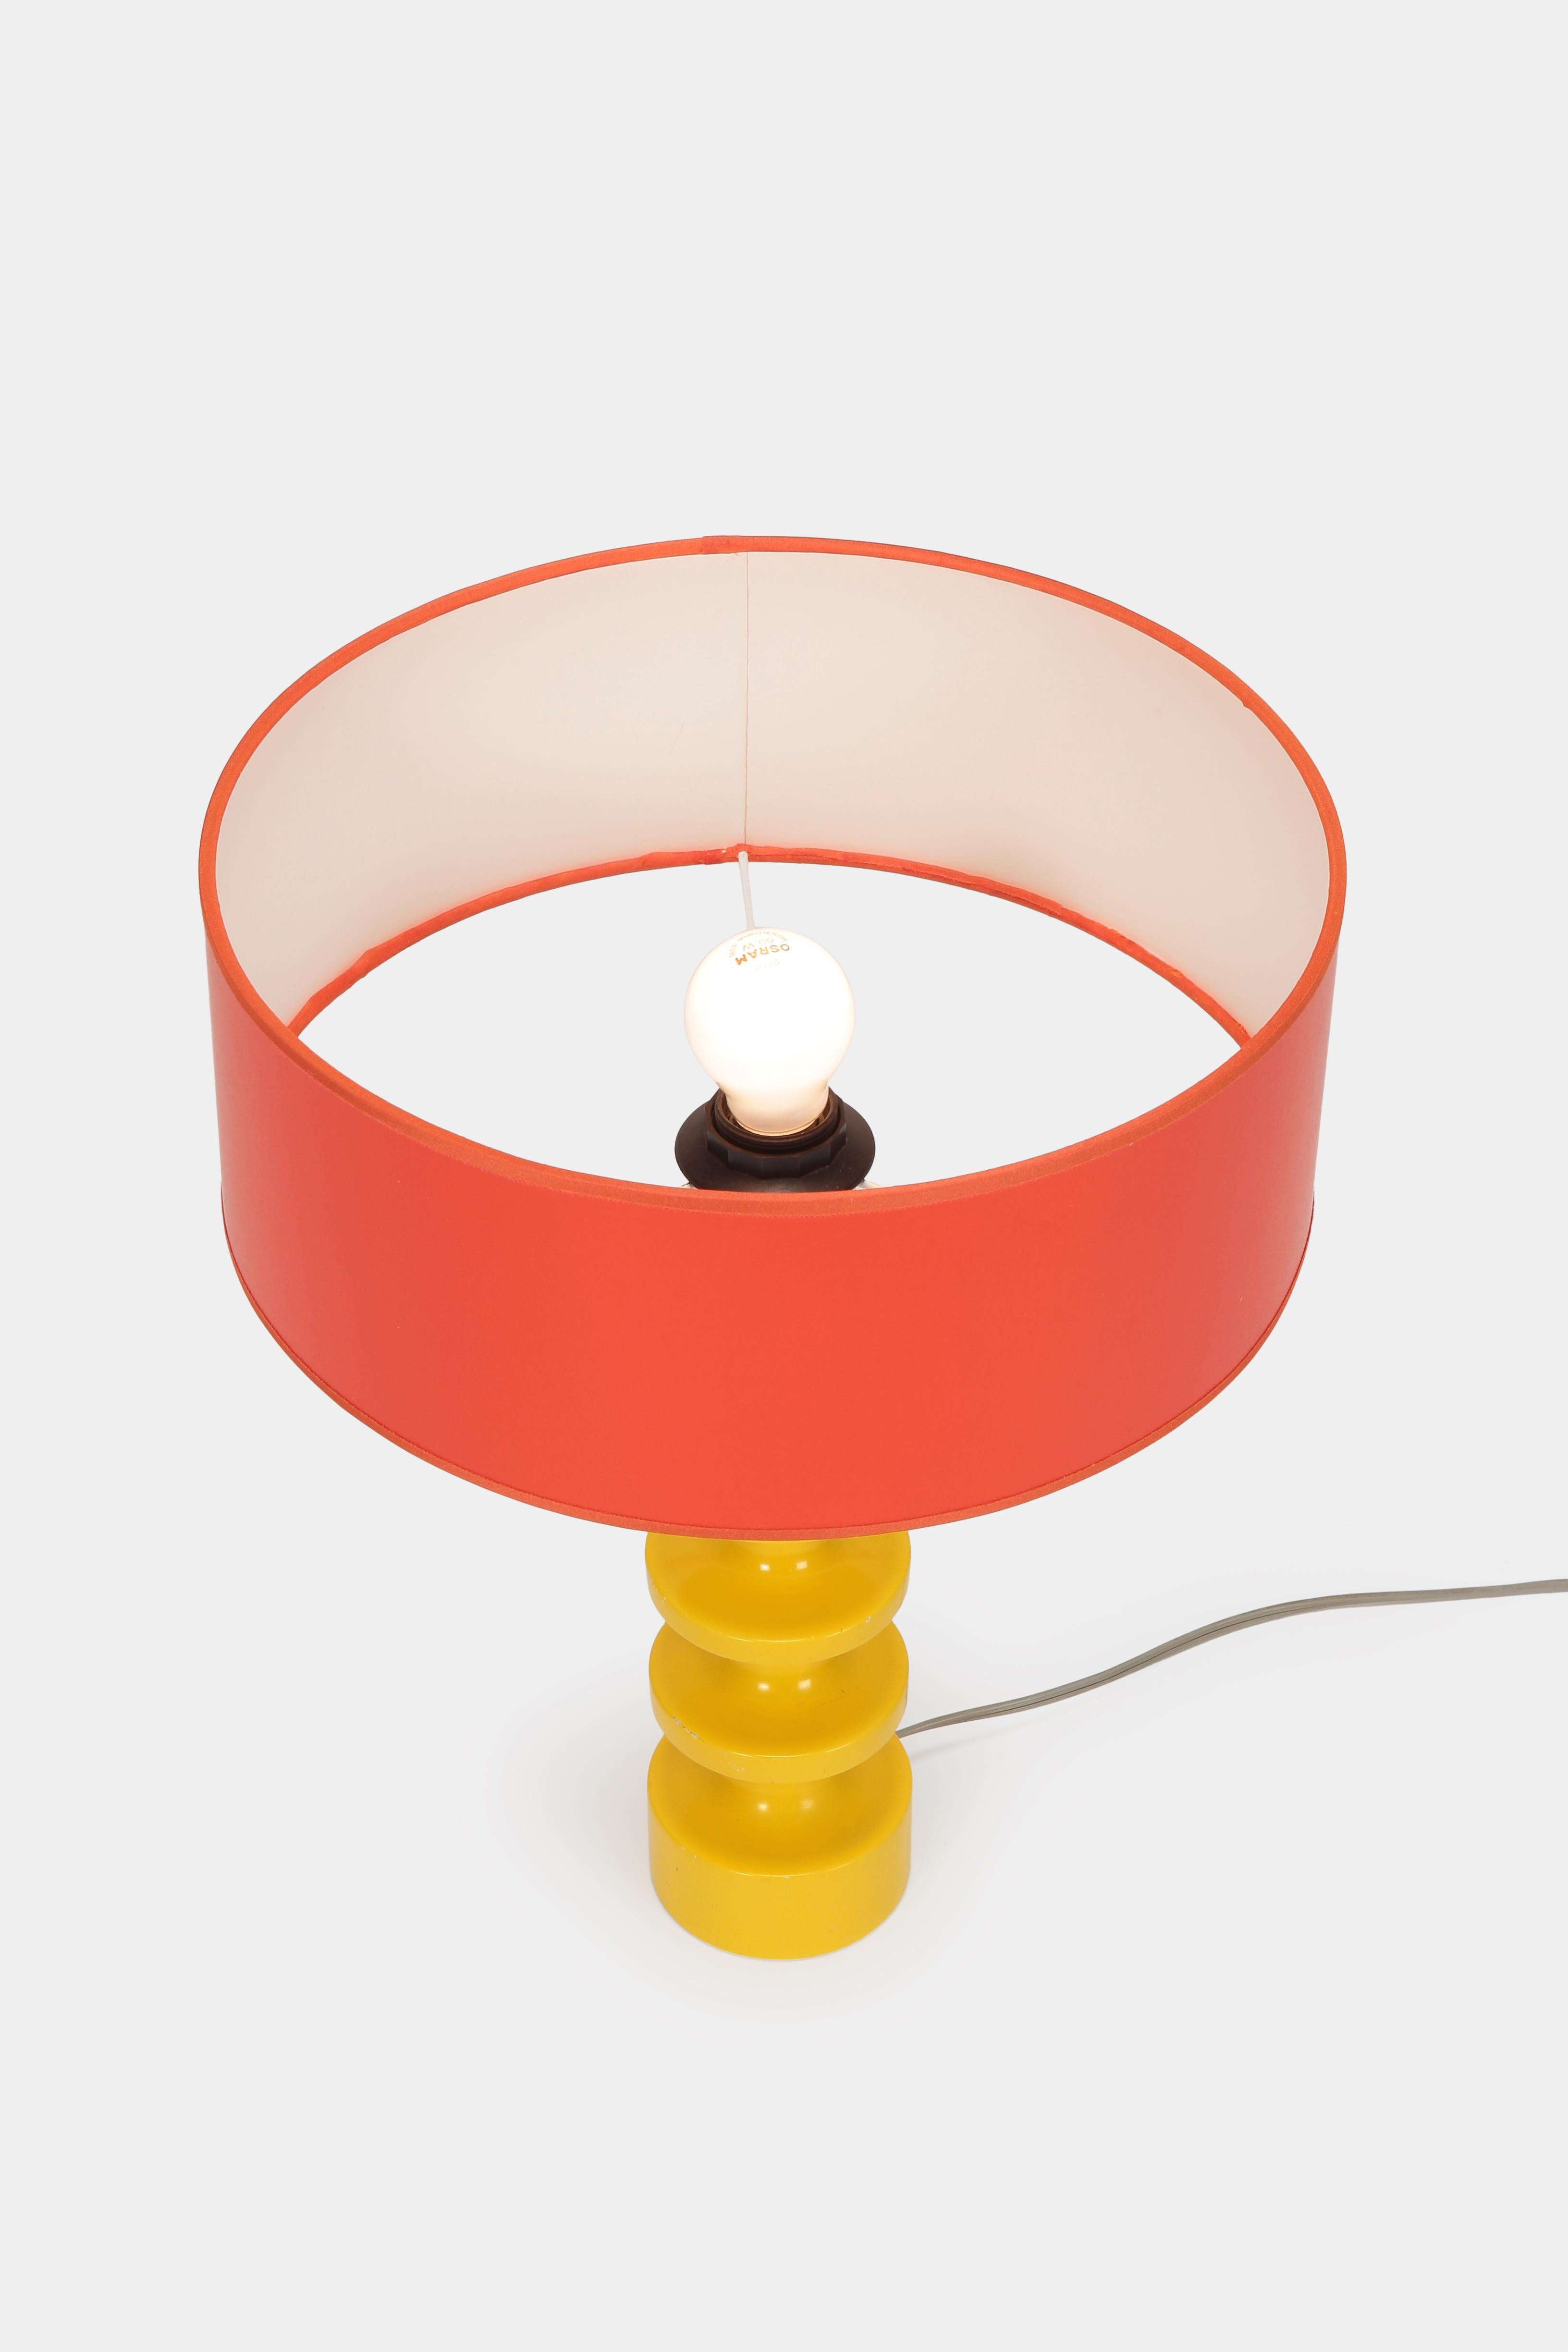 Uno & Östen Kristiansson table lamp manufactured by Luxus in the 1950s in Sweden. New orange lamp shade on a yellow lacquered beechwood base.